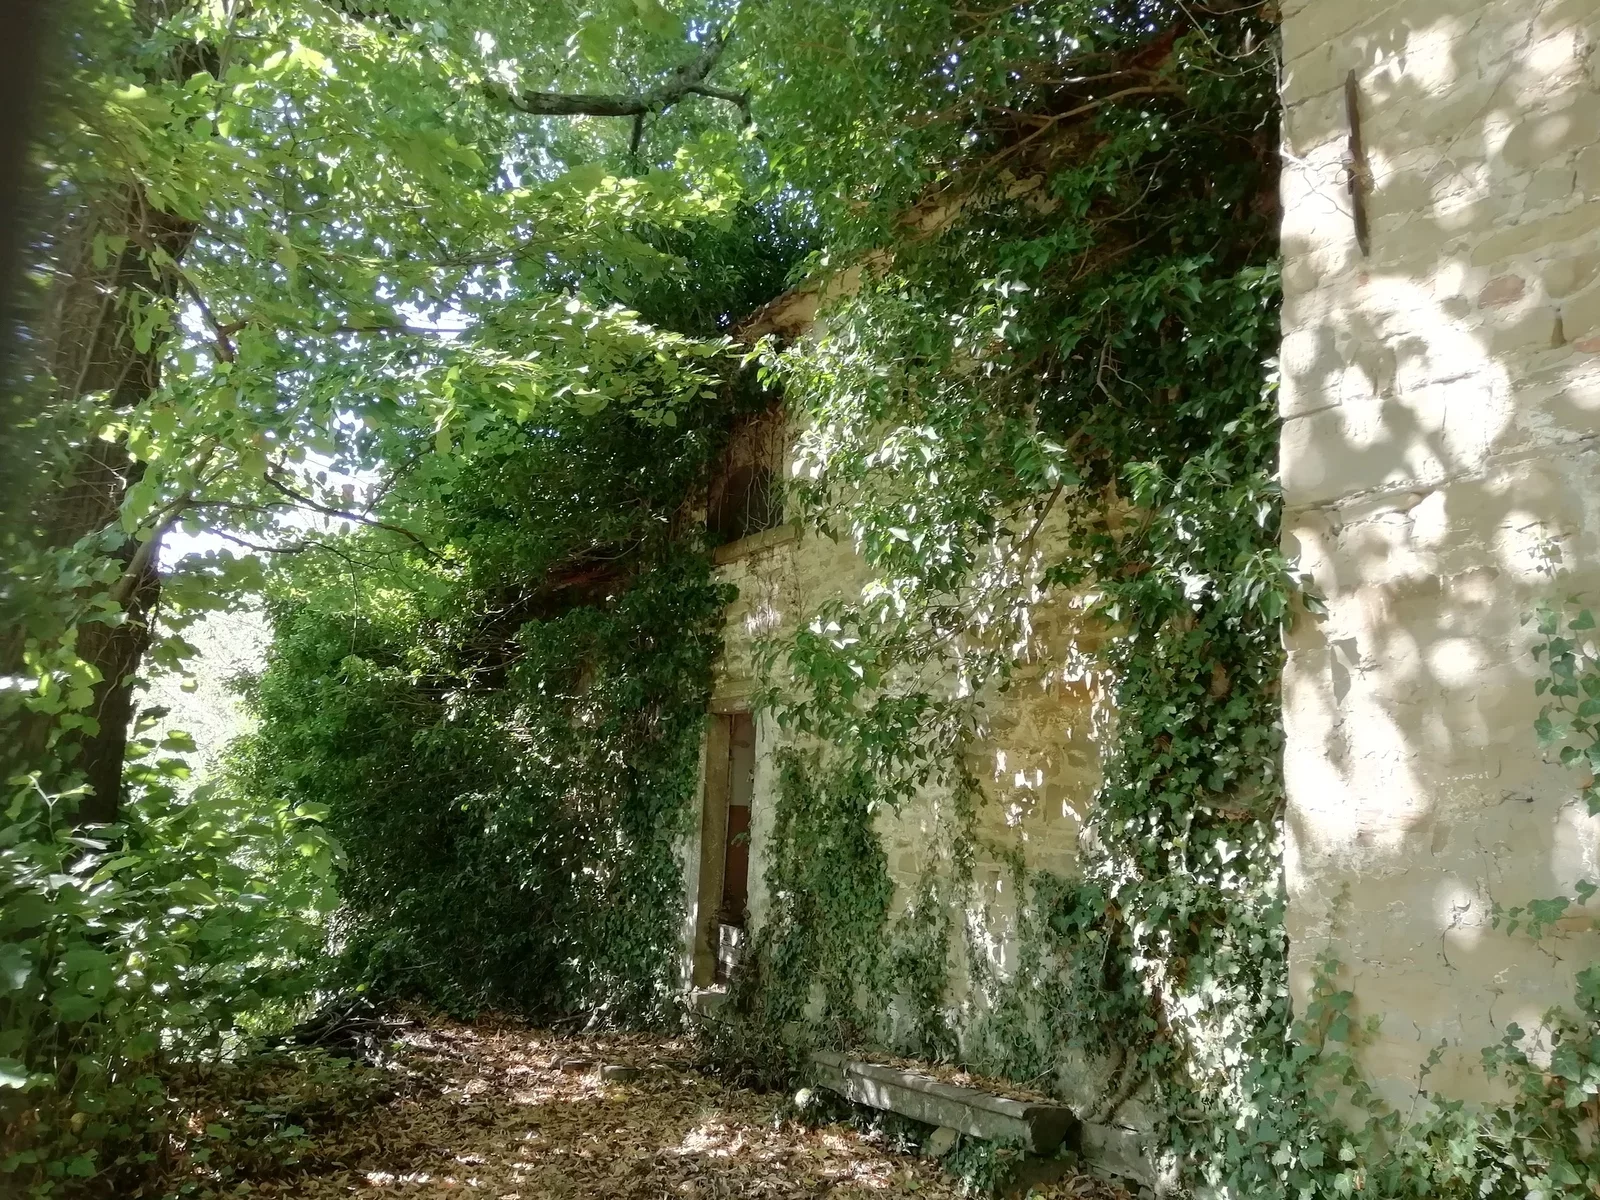 Overgrowth on the wall of a church in Italy